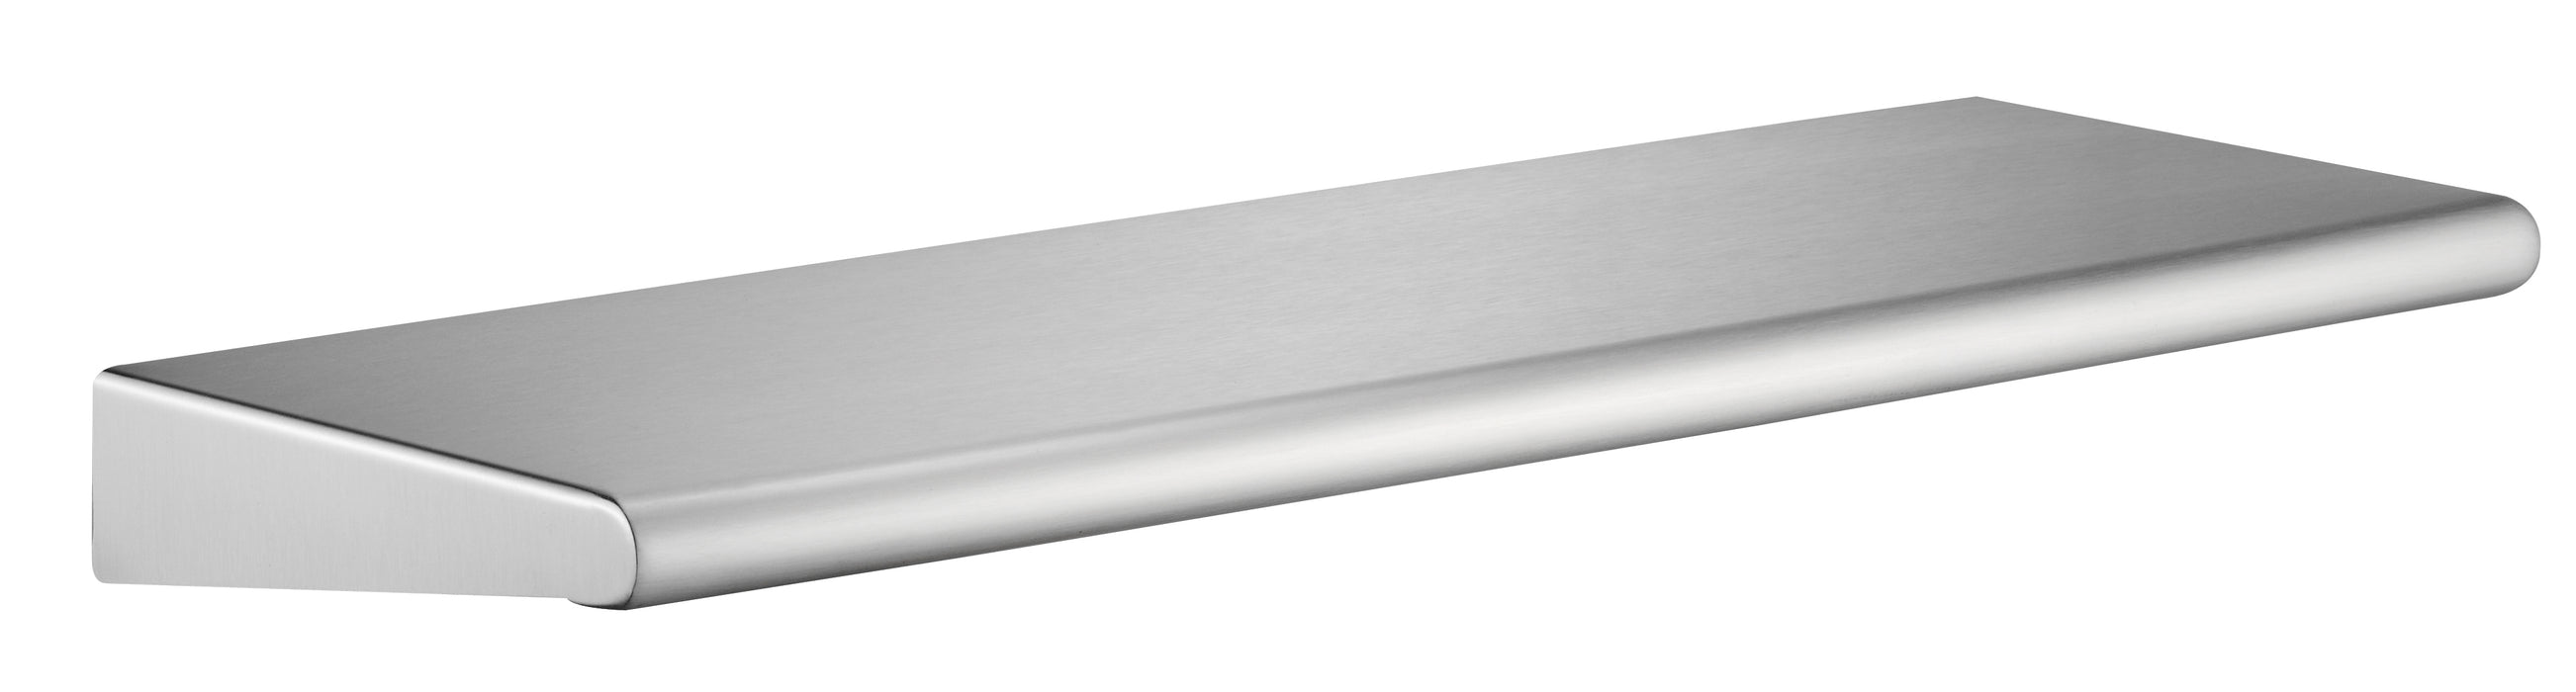 ASI 20692-648 Surface Mounted Shelf, Stainless Steel, 6 X 48 Inch